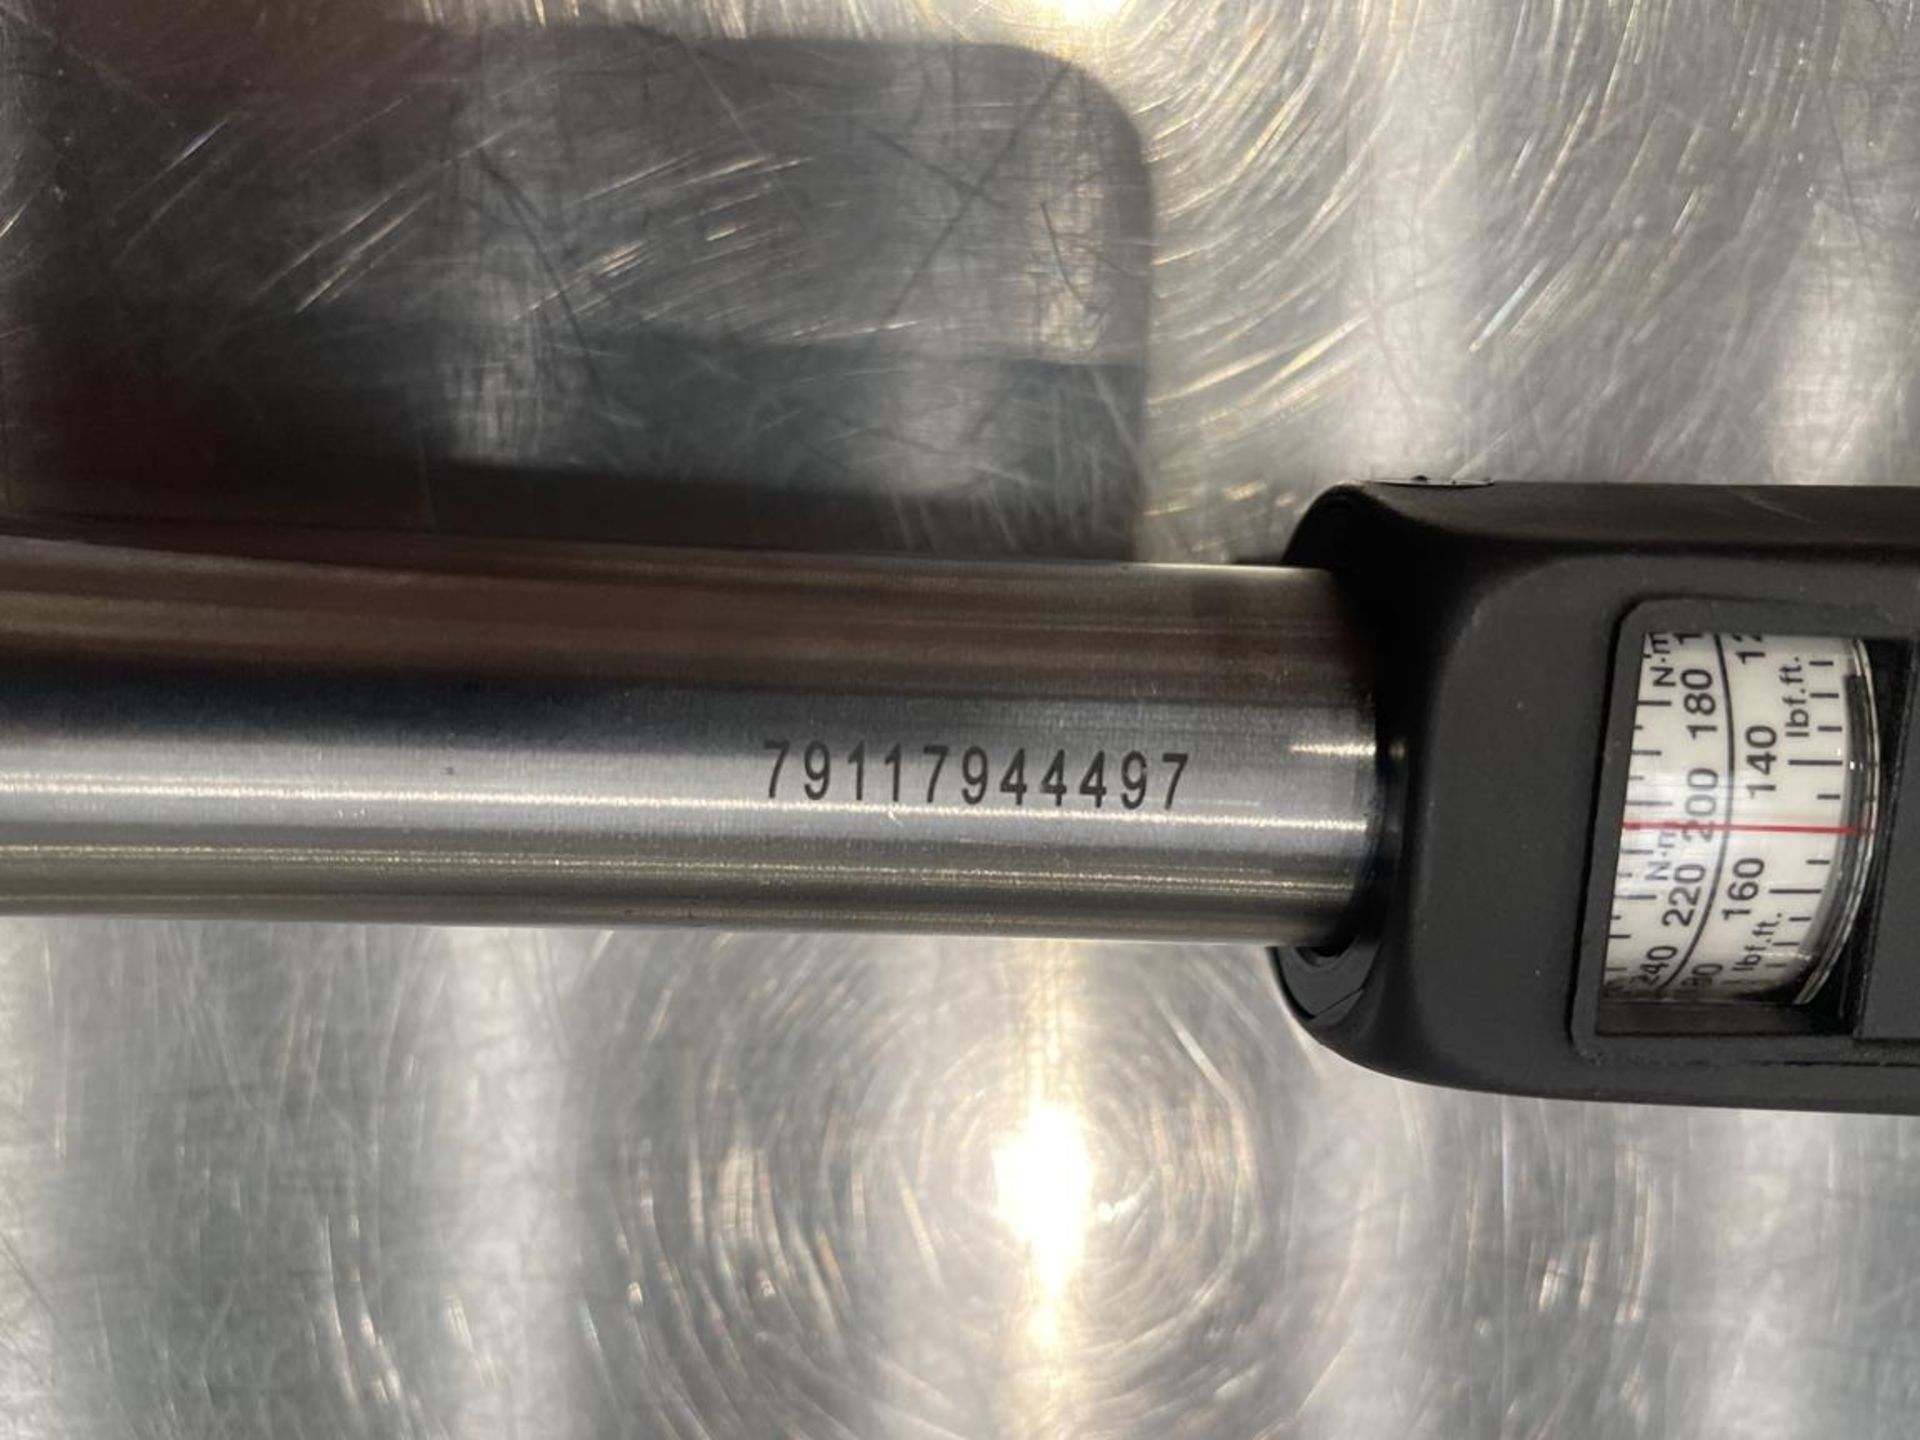 Wurth 1/2" torque wrench, 60 - 300Nm - Image 4 of 4